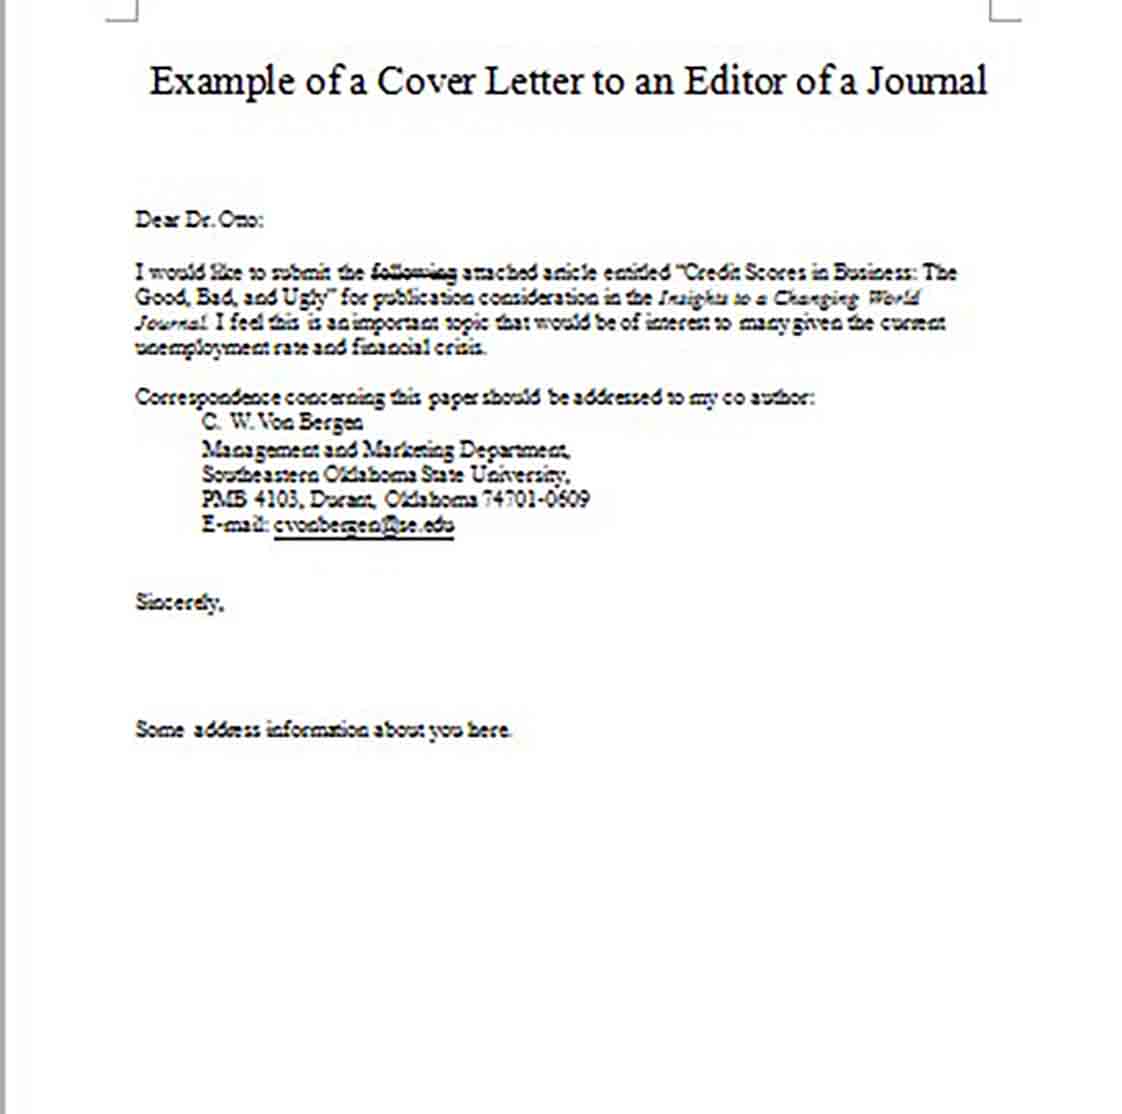 Example of a Cover Letter to an Editor of a Journal